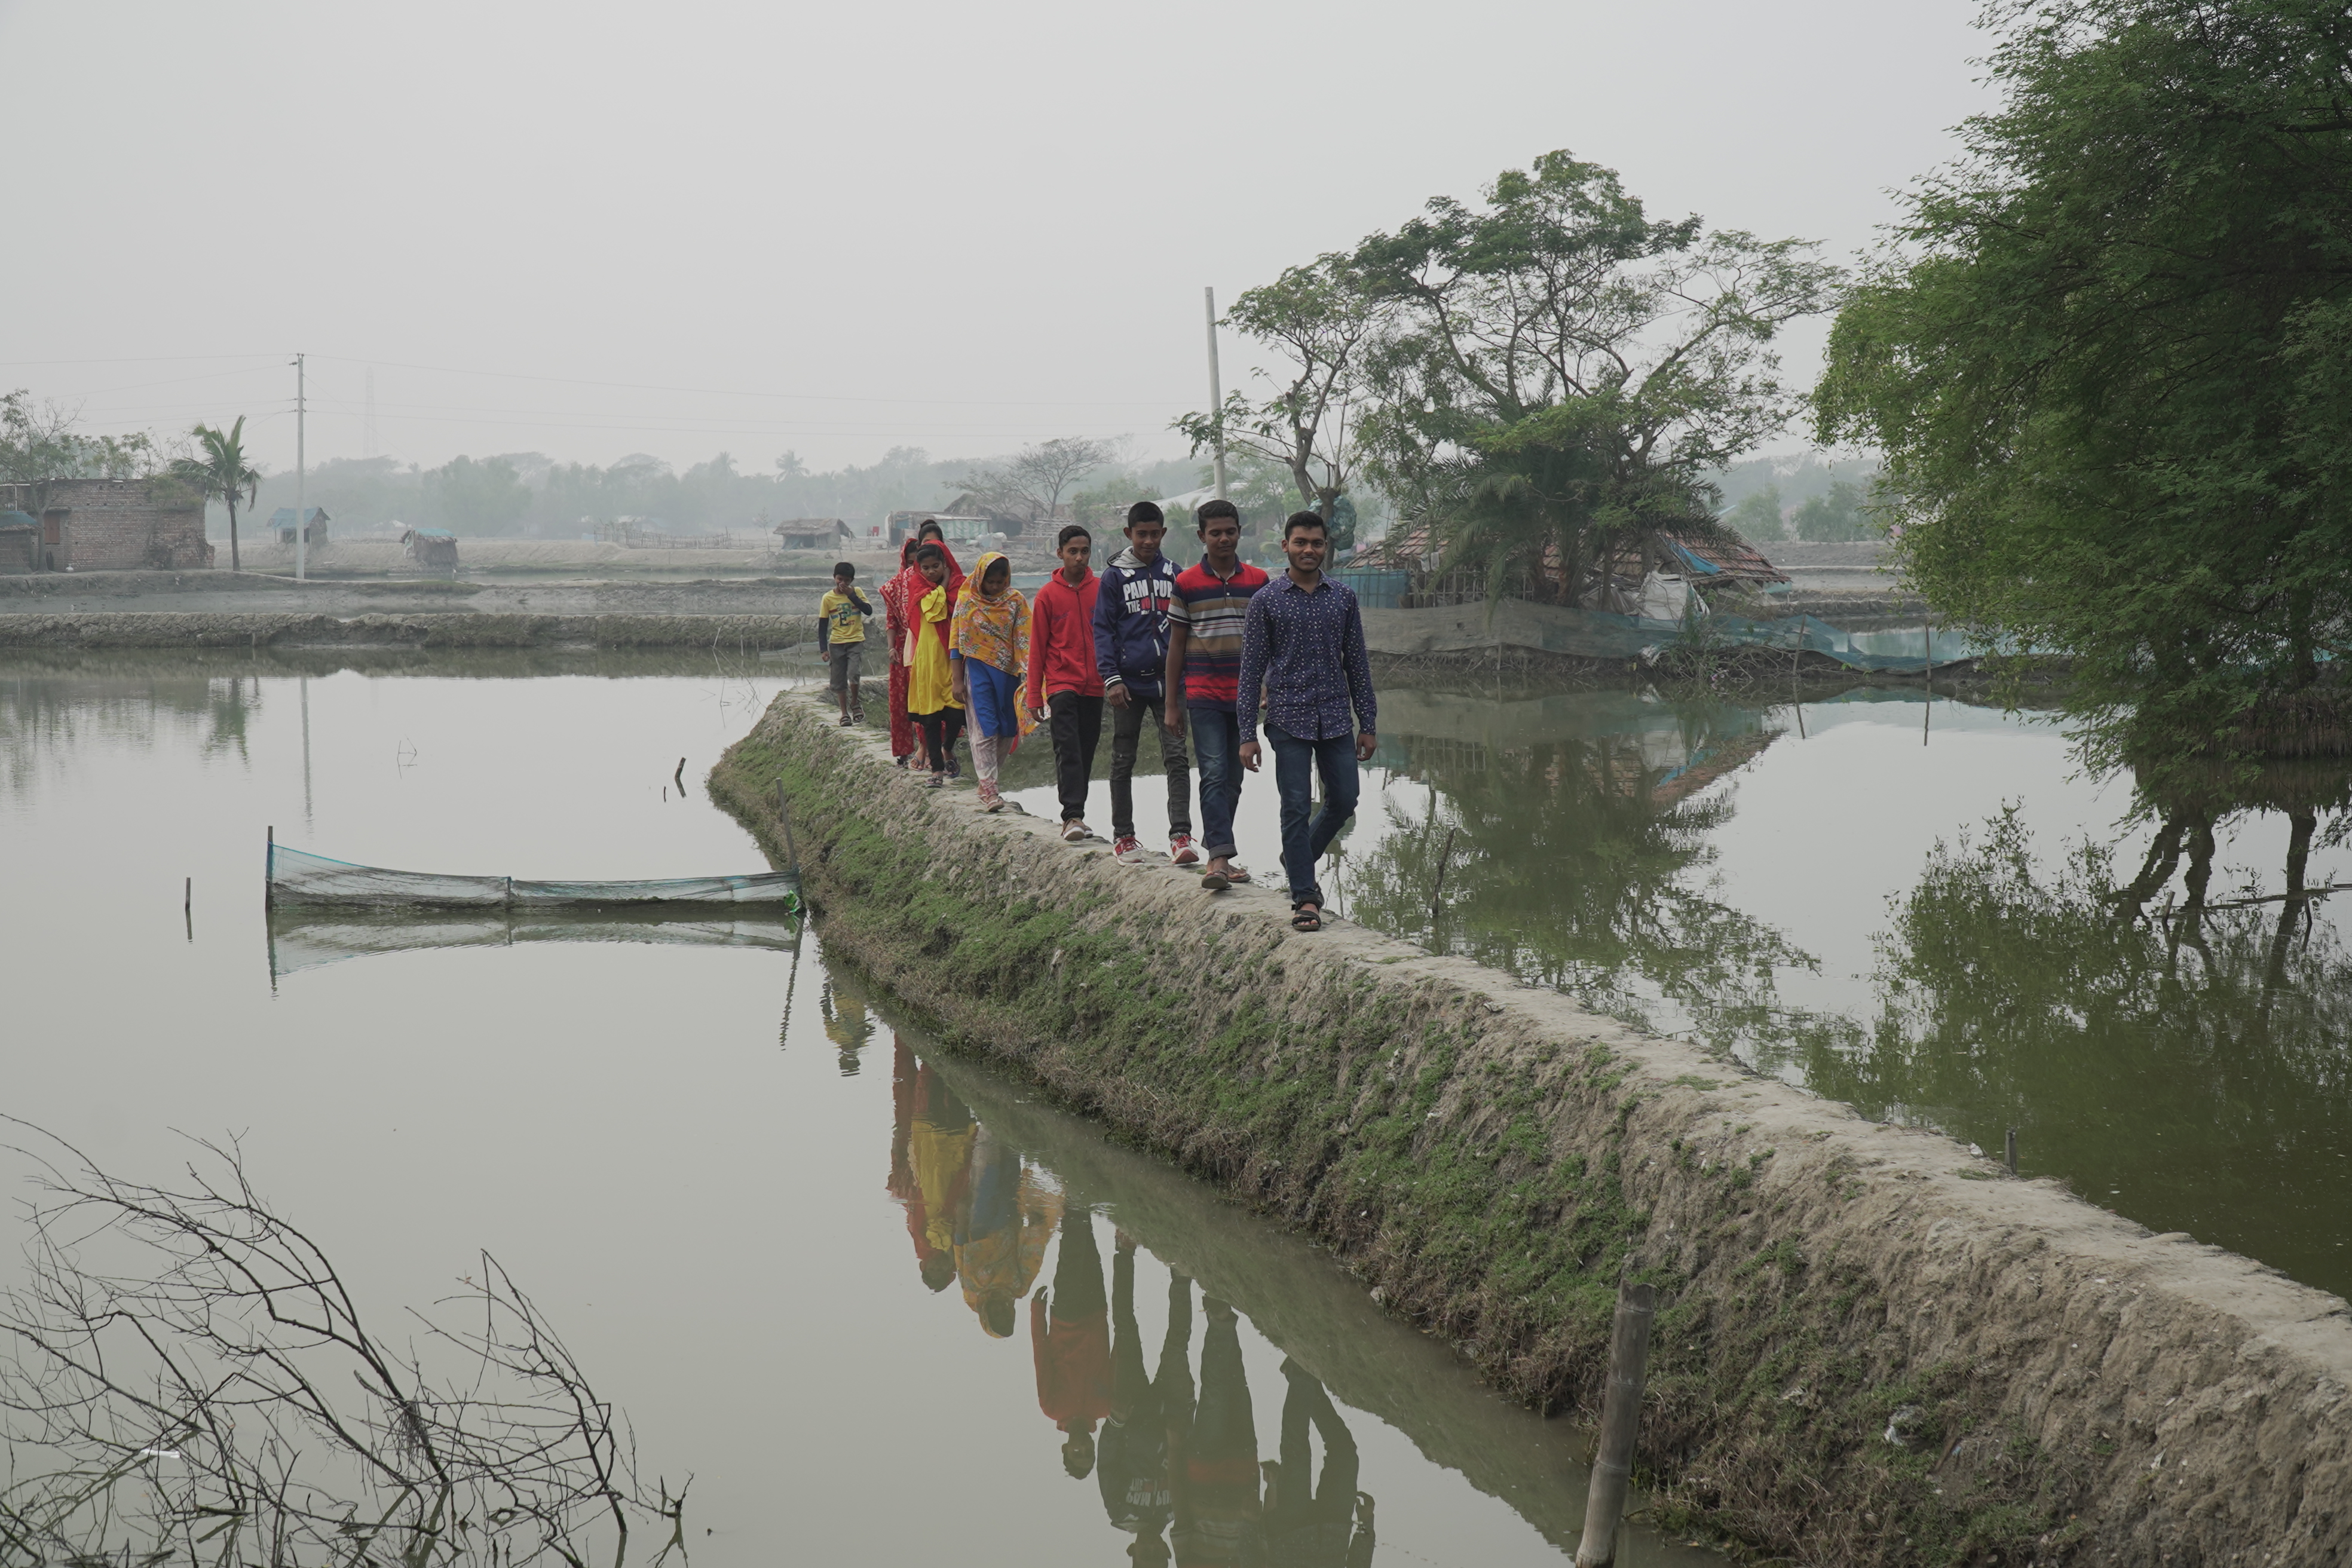 People walk along a wall in Bangladesh, next to a flood that disrupted their village